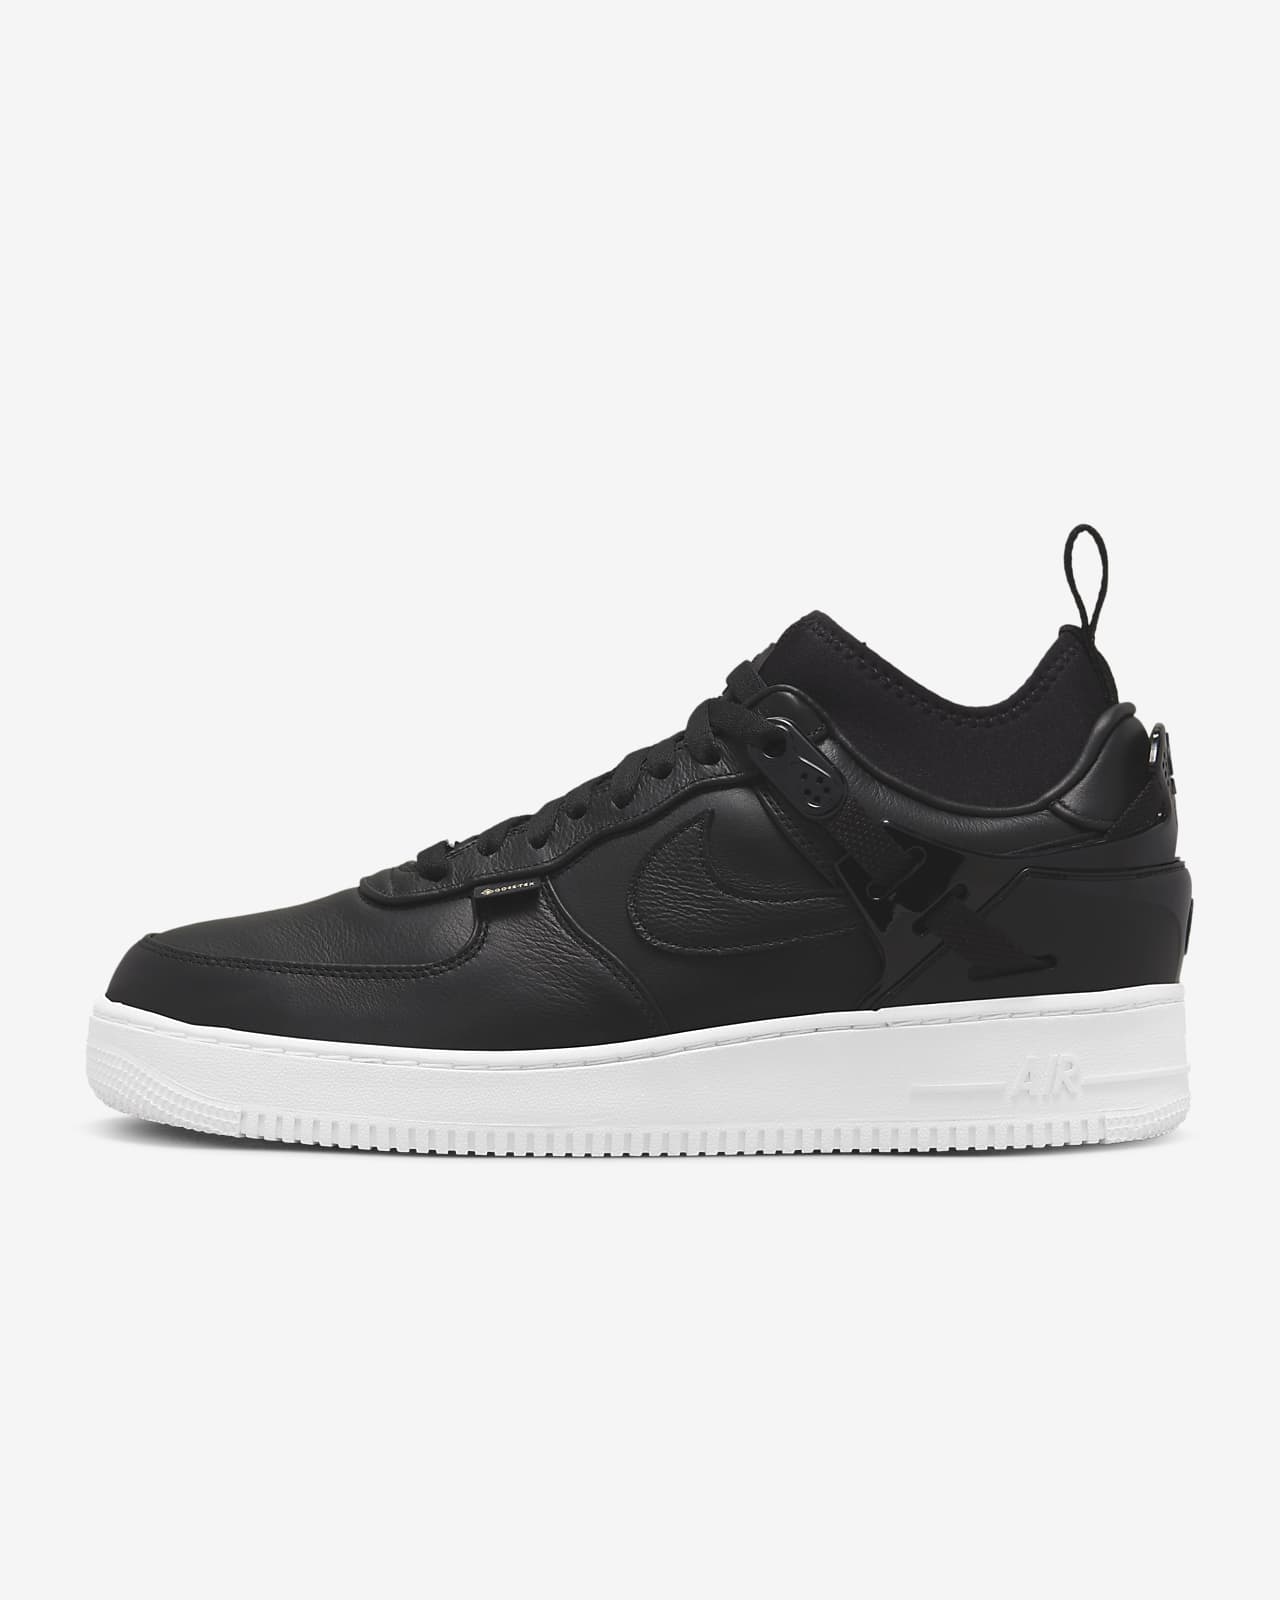 Nike Air Force 1 Low SP x UNDERCOVER Men's Shoes. Nike RO